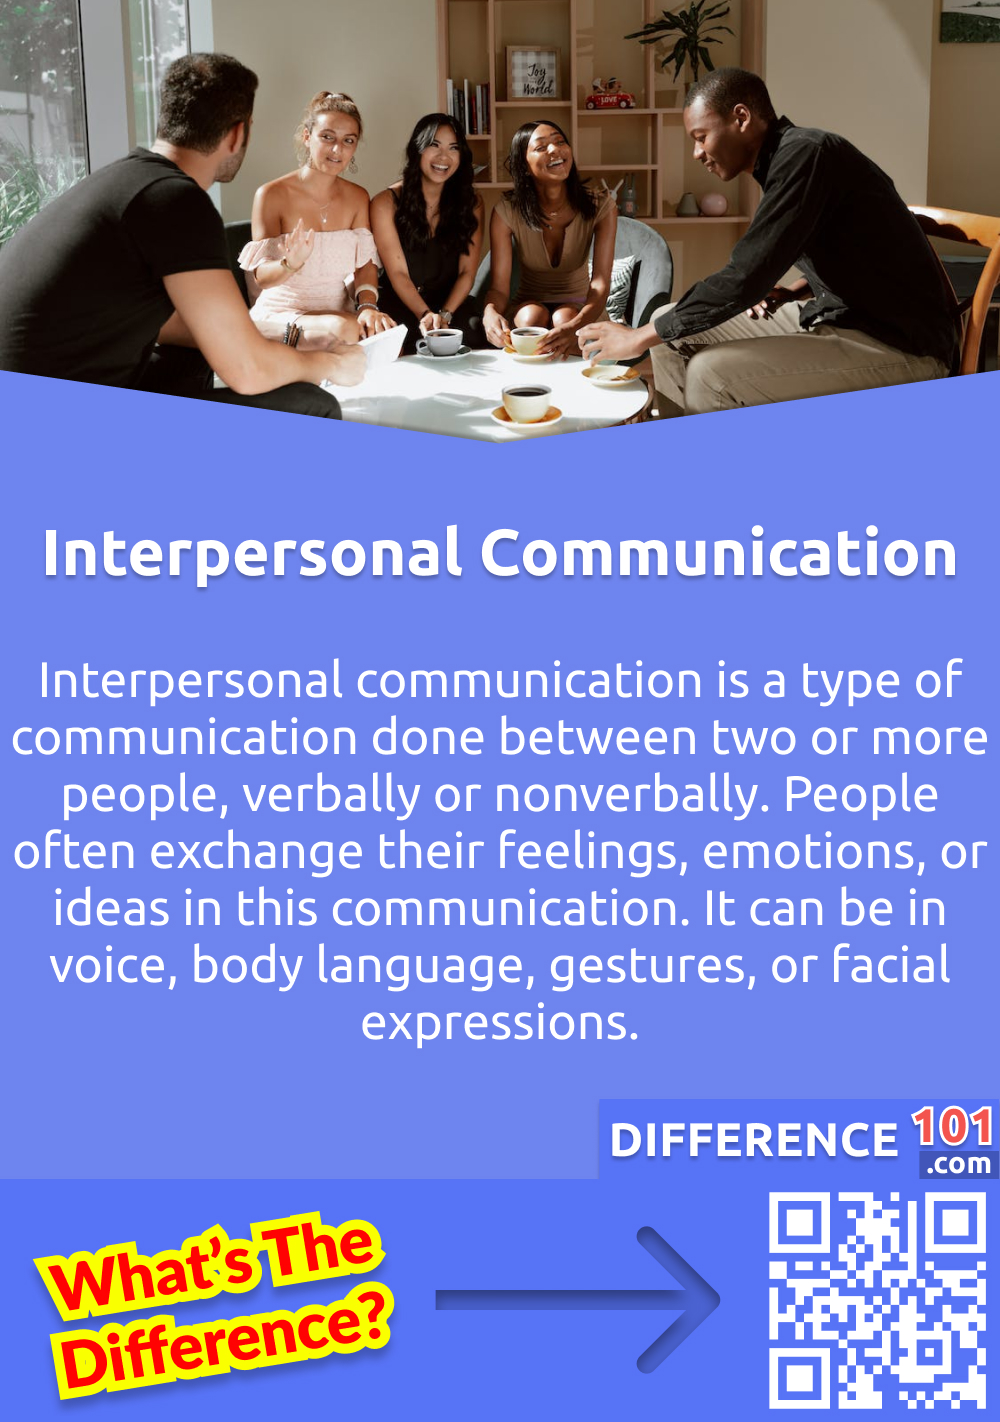 What Is Interpersonal Communication? Interpersonal communication is a type of communication done between two or more people, verbally or nonverbally. People often exchange their feelings, emotions, or ideas in this communication. It can be in voice, body language, gestures, or facial expressions.